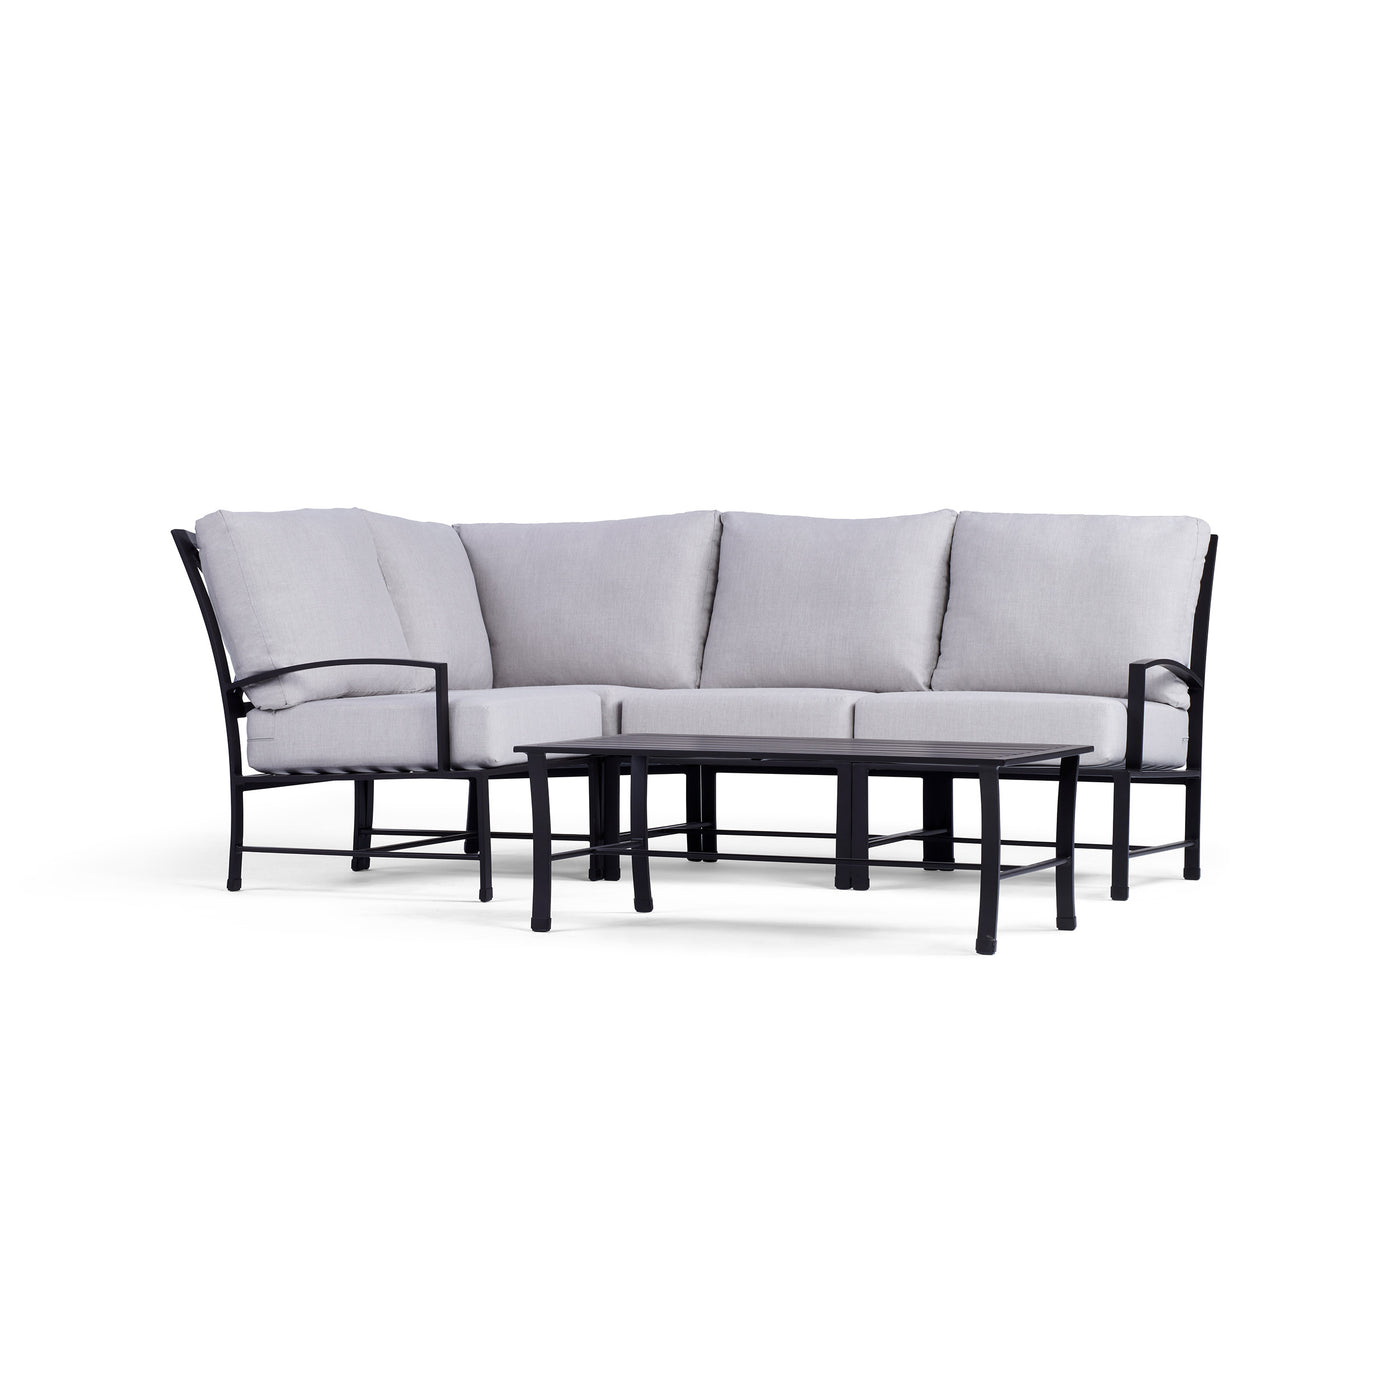  Yardbird Colby Outdoor Small Sectional Set Outdoor Furniture